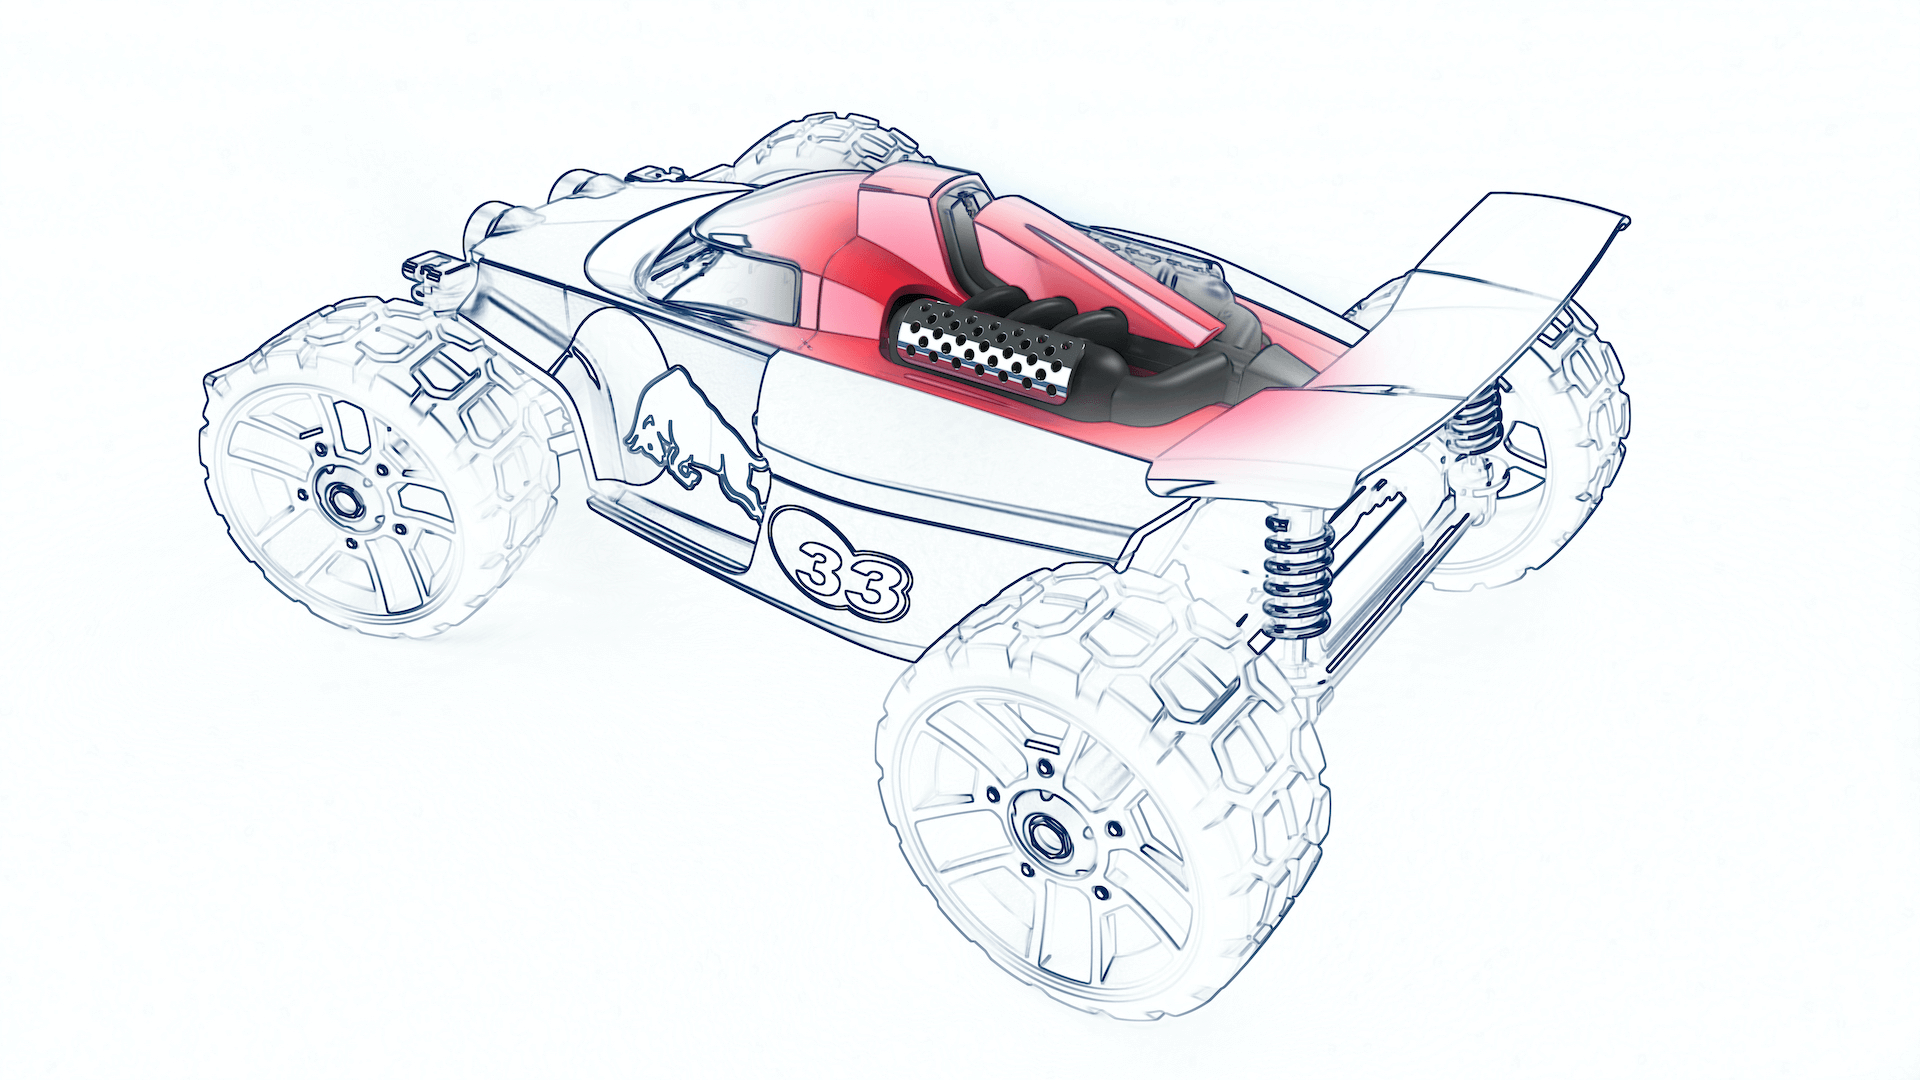 A detailed drawing of the remote-controlled Carrera racing car in Red Bull branding from above.